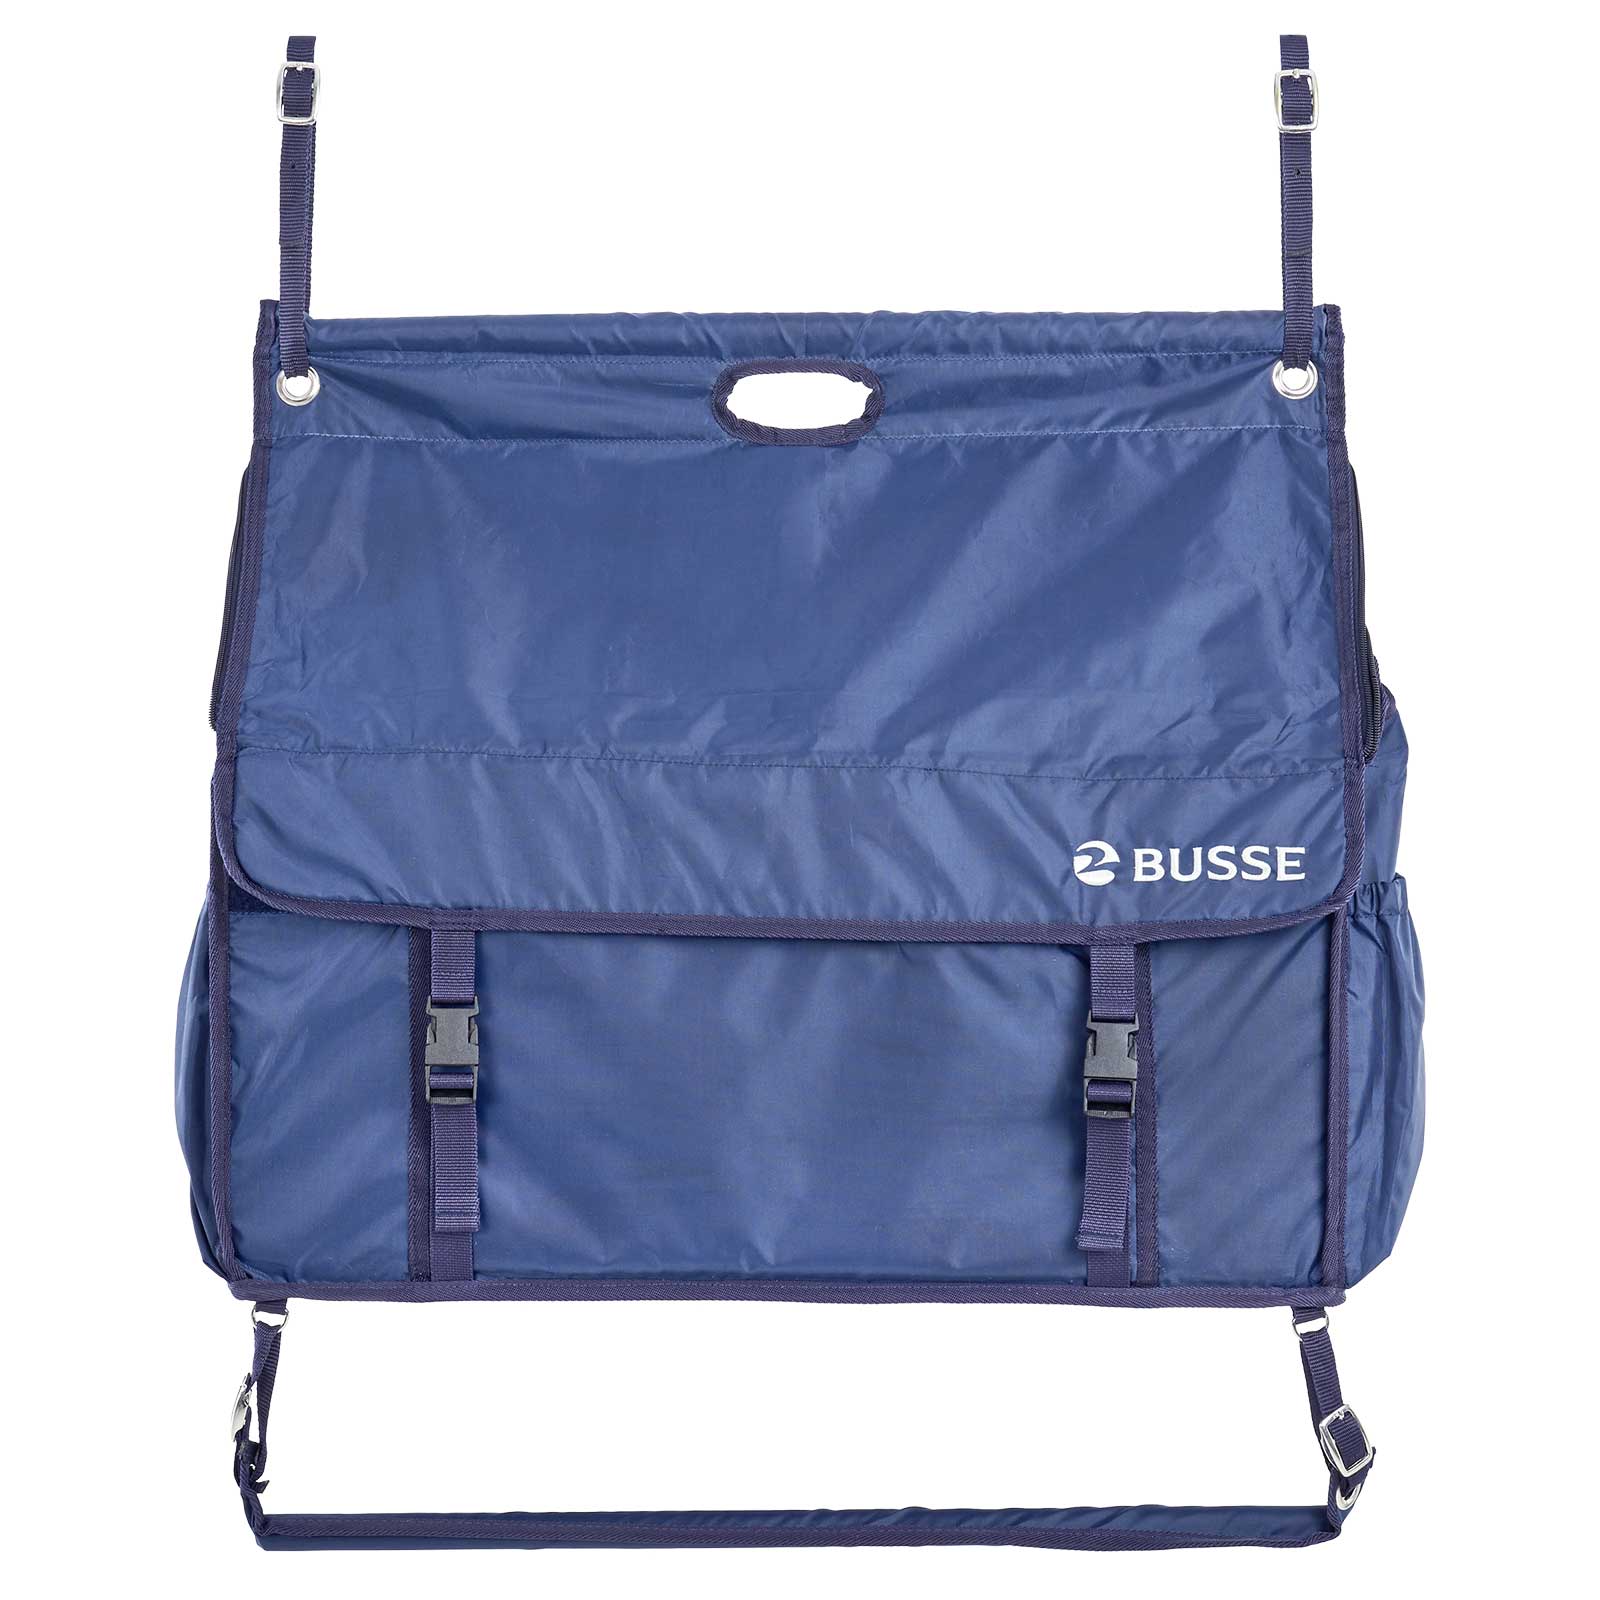 Busse Stable Bag Rio Pro navy